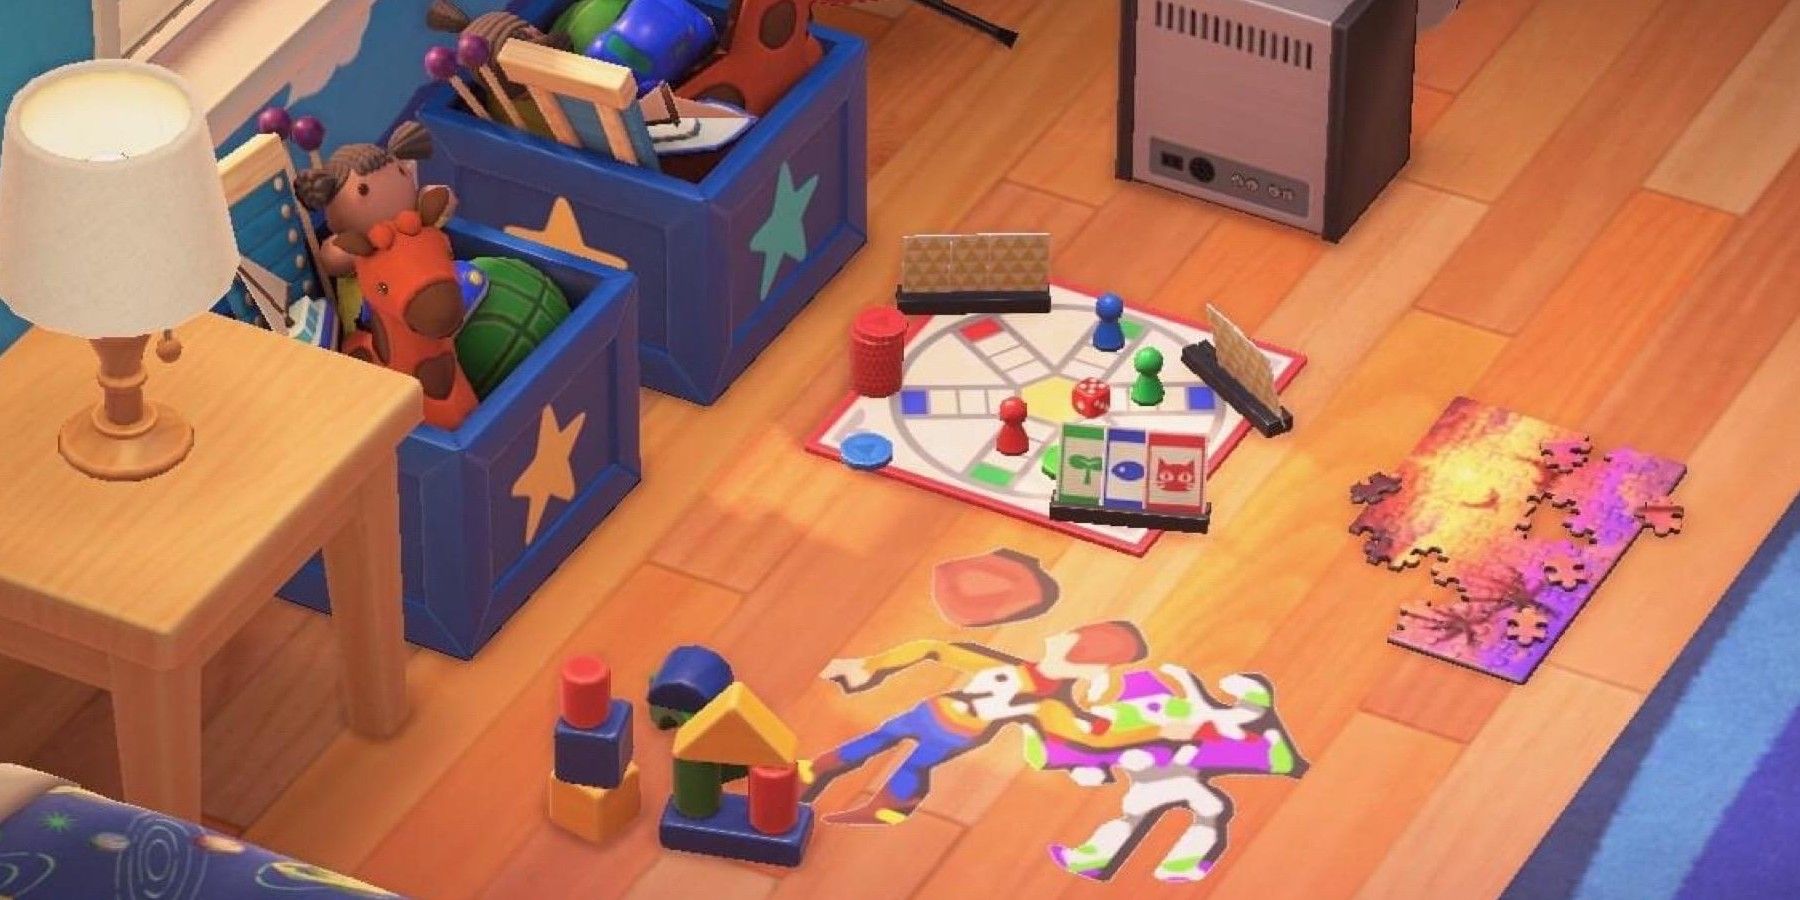 Animal Crossing Toy Story Fan Recreates Andys Room With Woody & Buzz